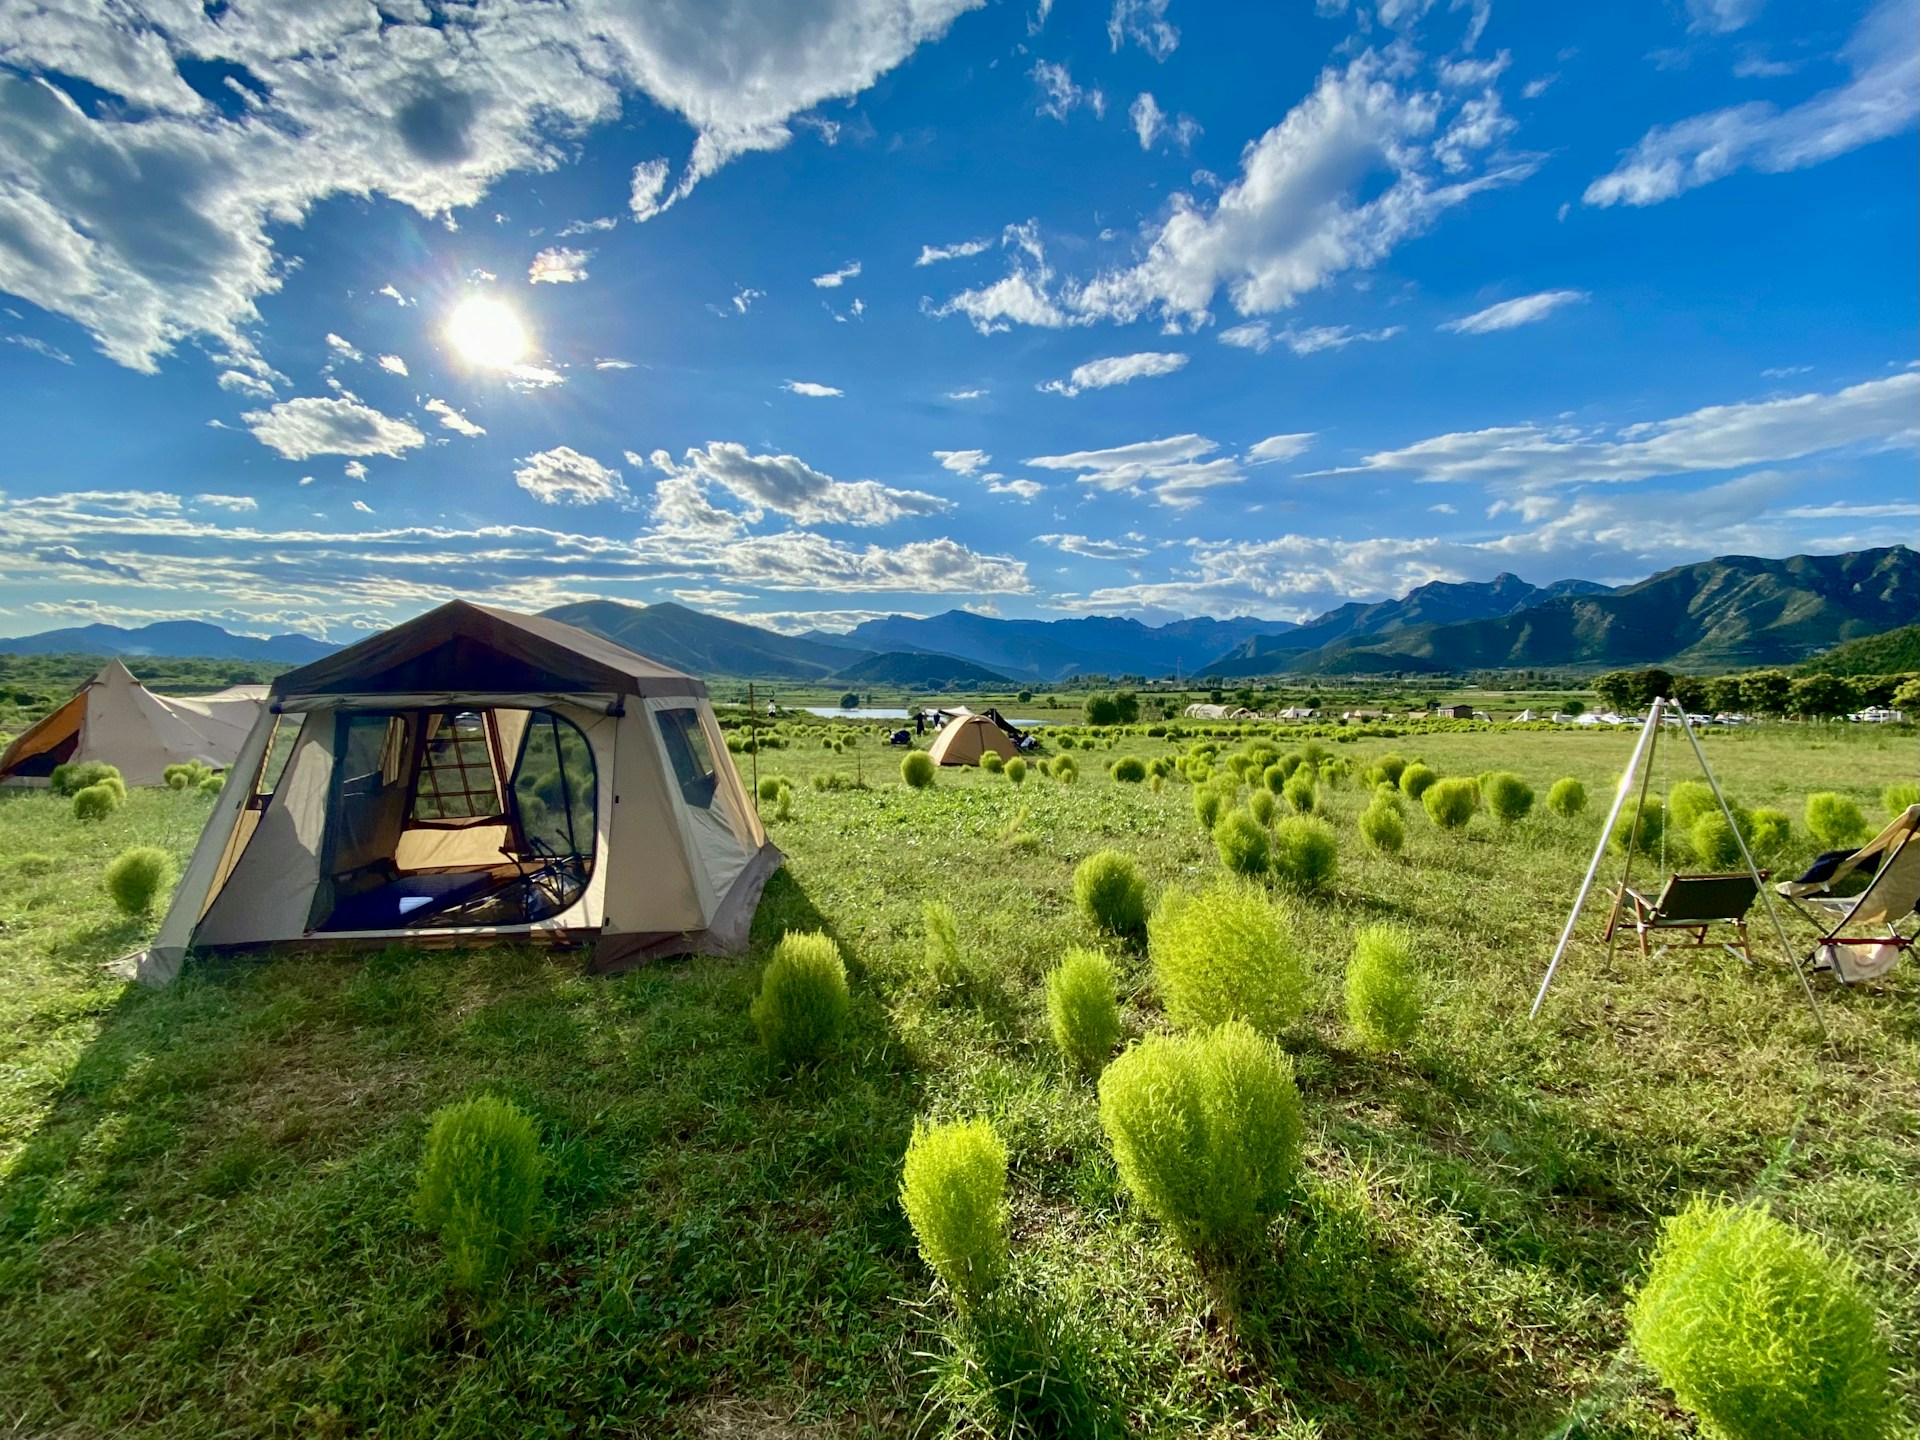 a tent set up in a field with mountains in the background